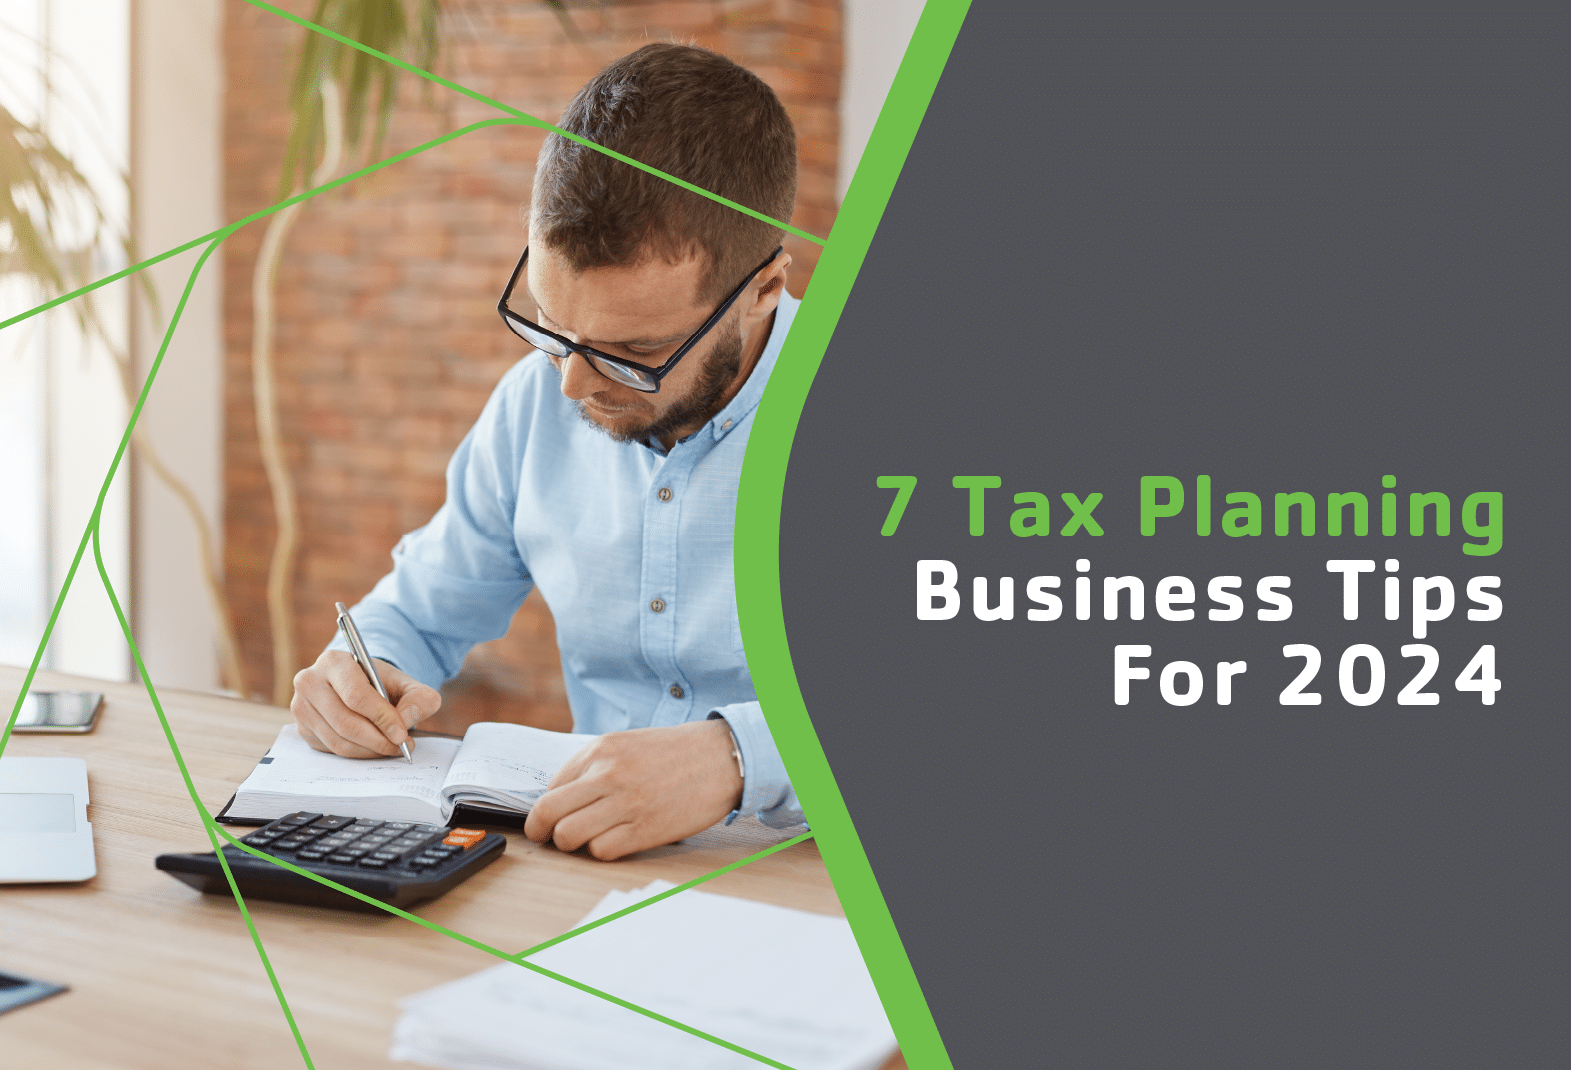 7 Tax Planning Business Tips For 2024